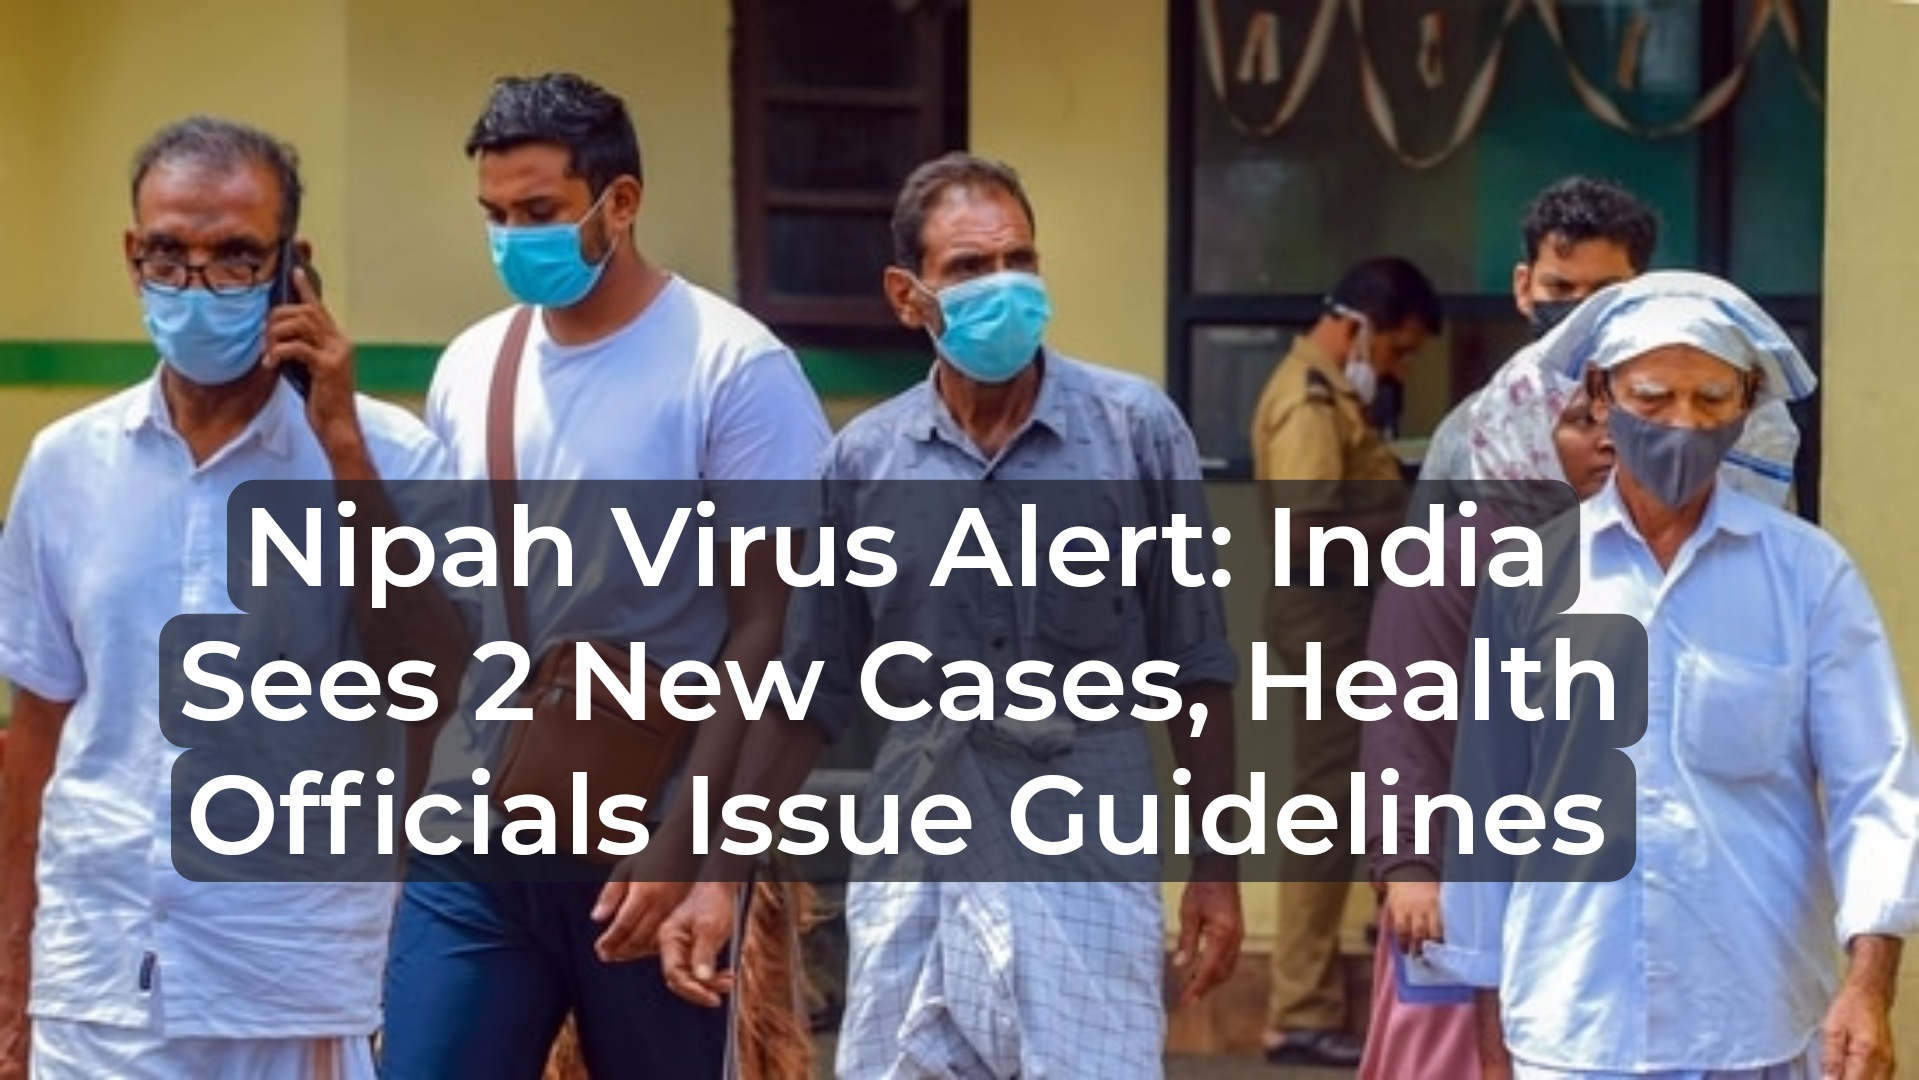 Nipah Virus Alert: India Sees 2 New Cases, Health Officials Issue Guidelines